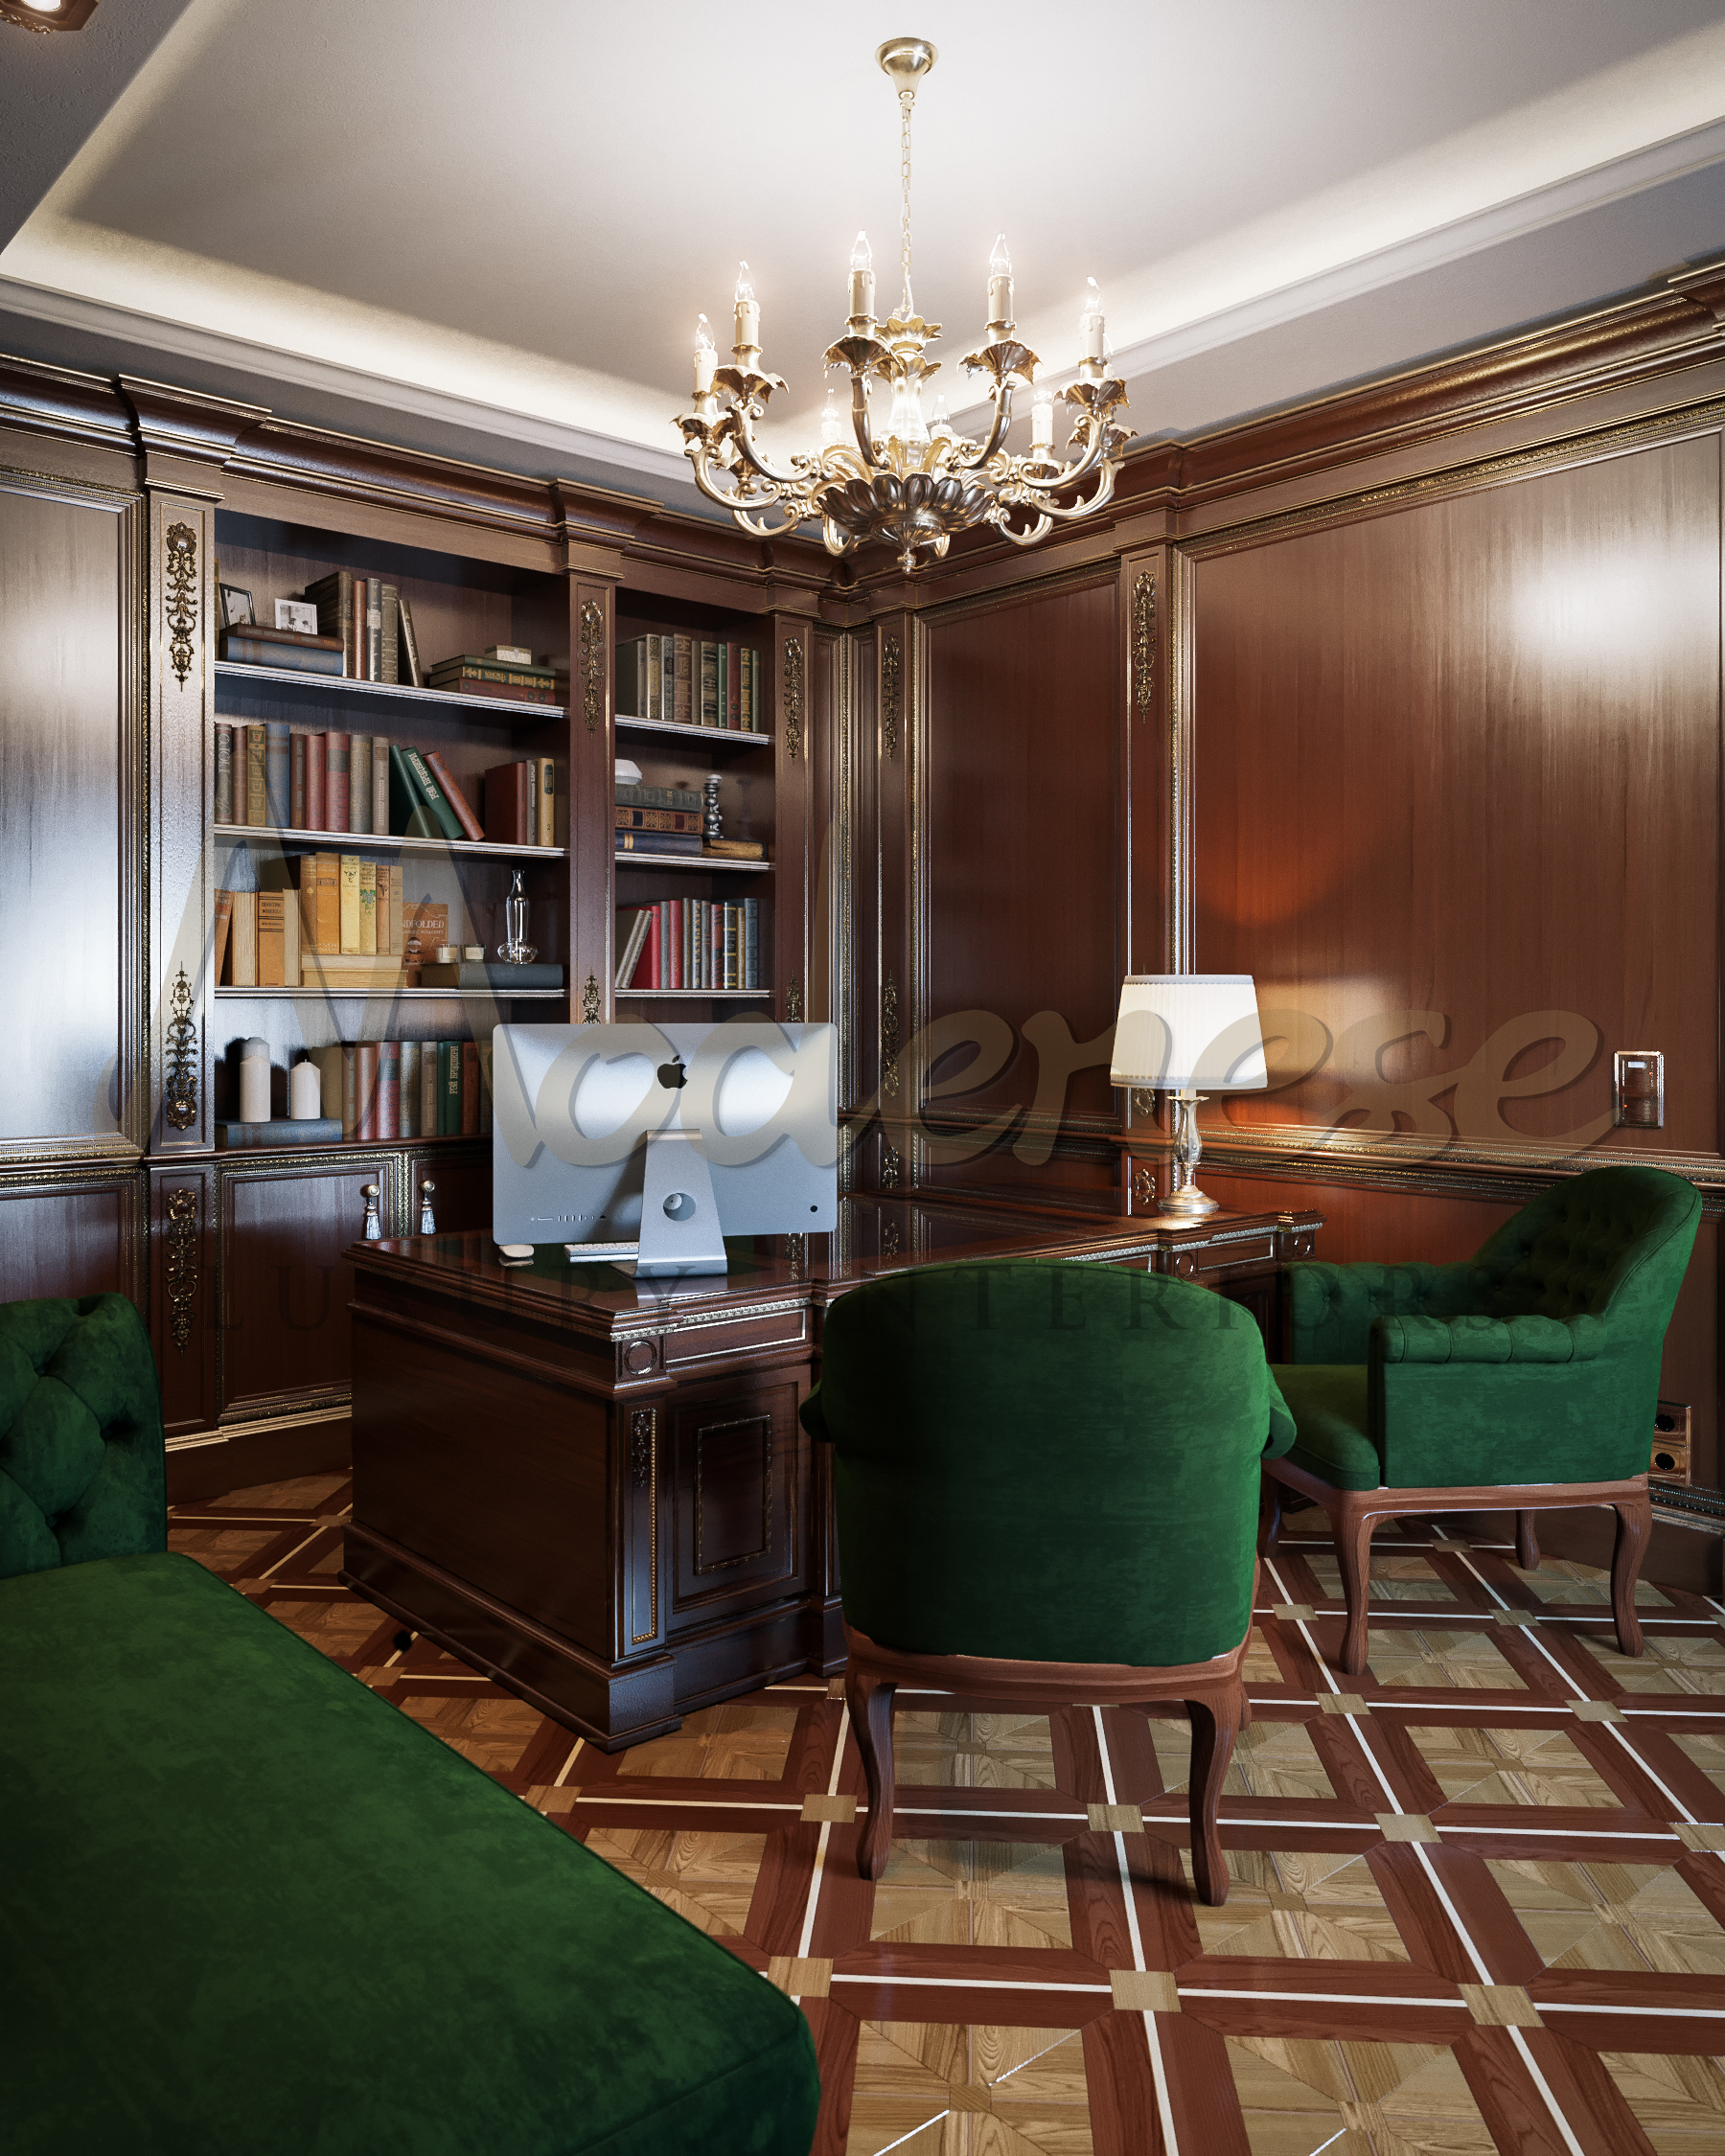 Refined classic style, exclusive design office furniture. Bespoke office interiors for the most luxurious private projects.